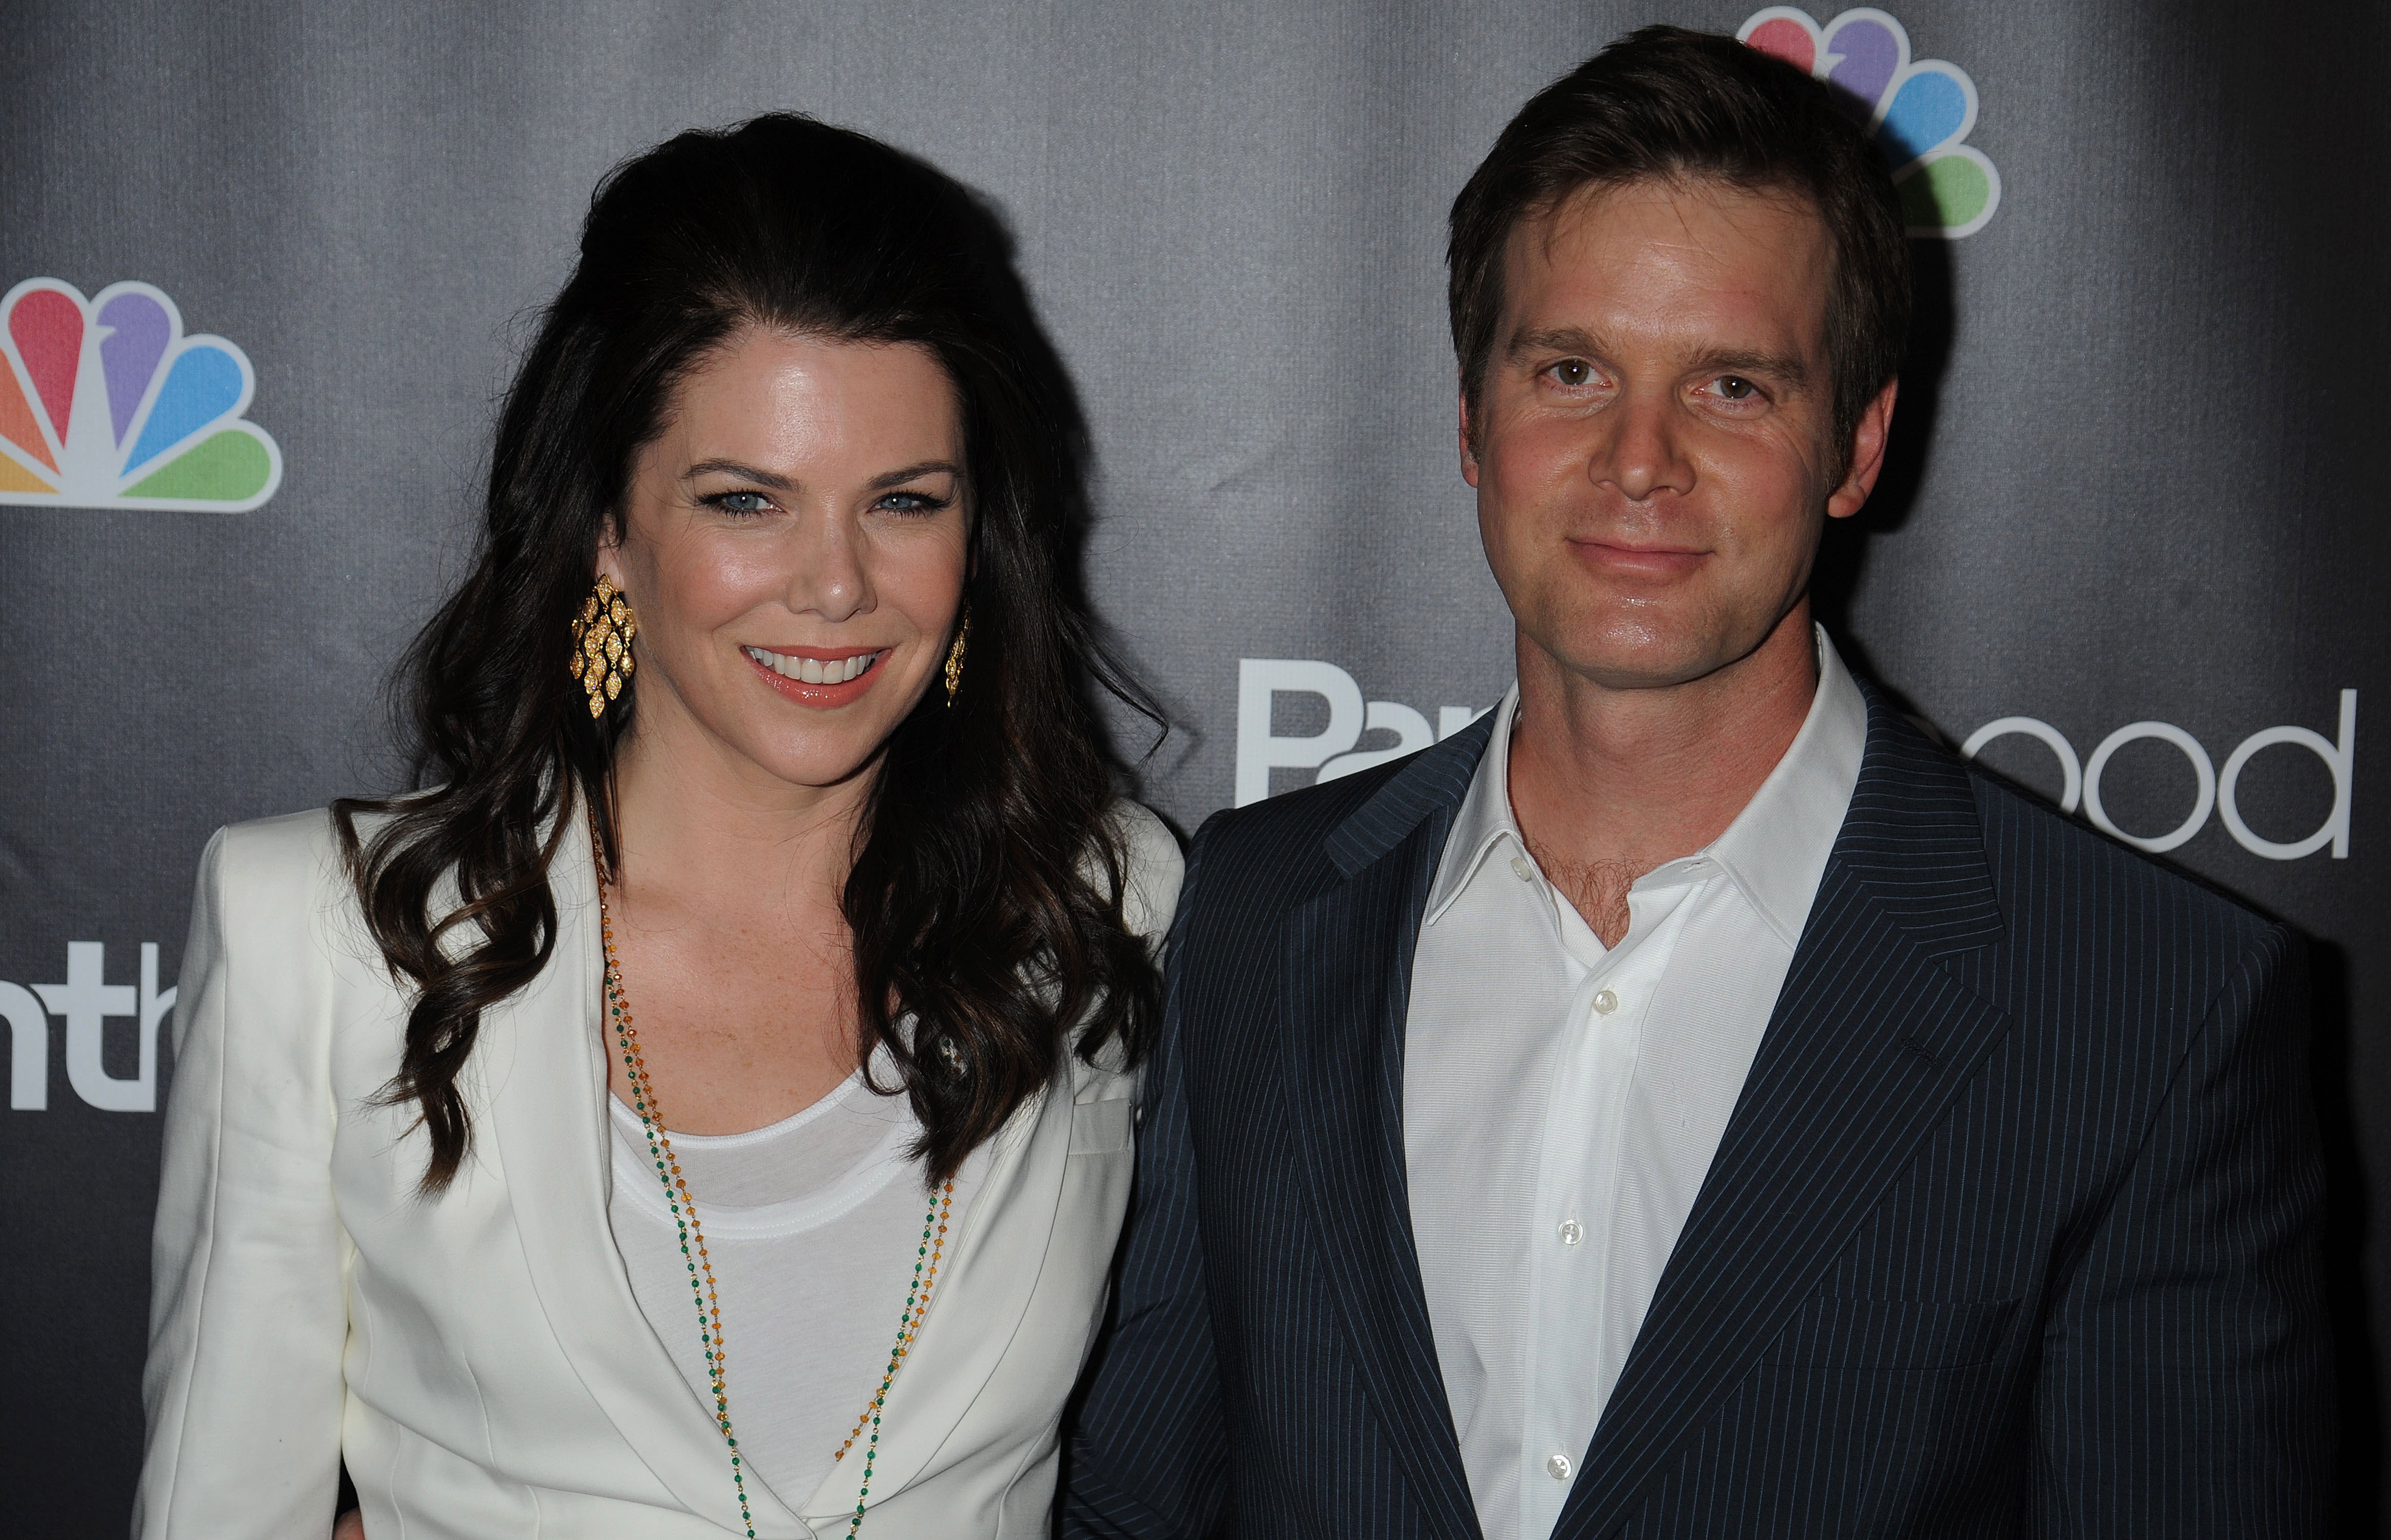 Lauren Graham and Peter Krause attend the Los Angeles premiere of "Parenthood" at Directors Guild Theatre on February 22, 2010